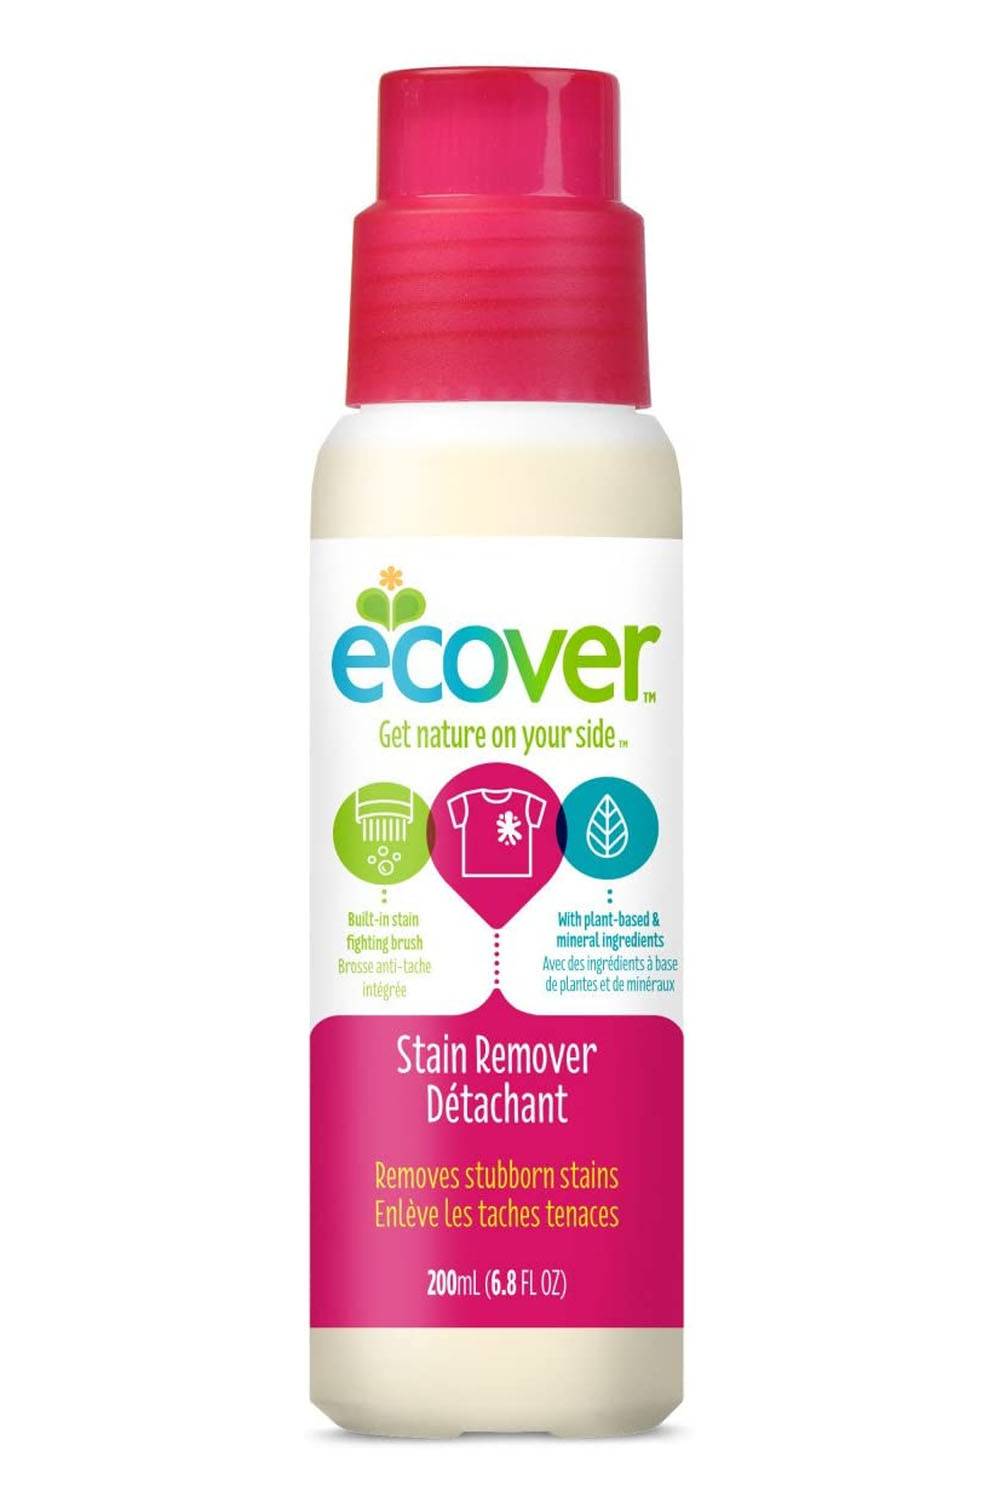 ecover eco-friendly stain remover